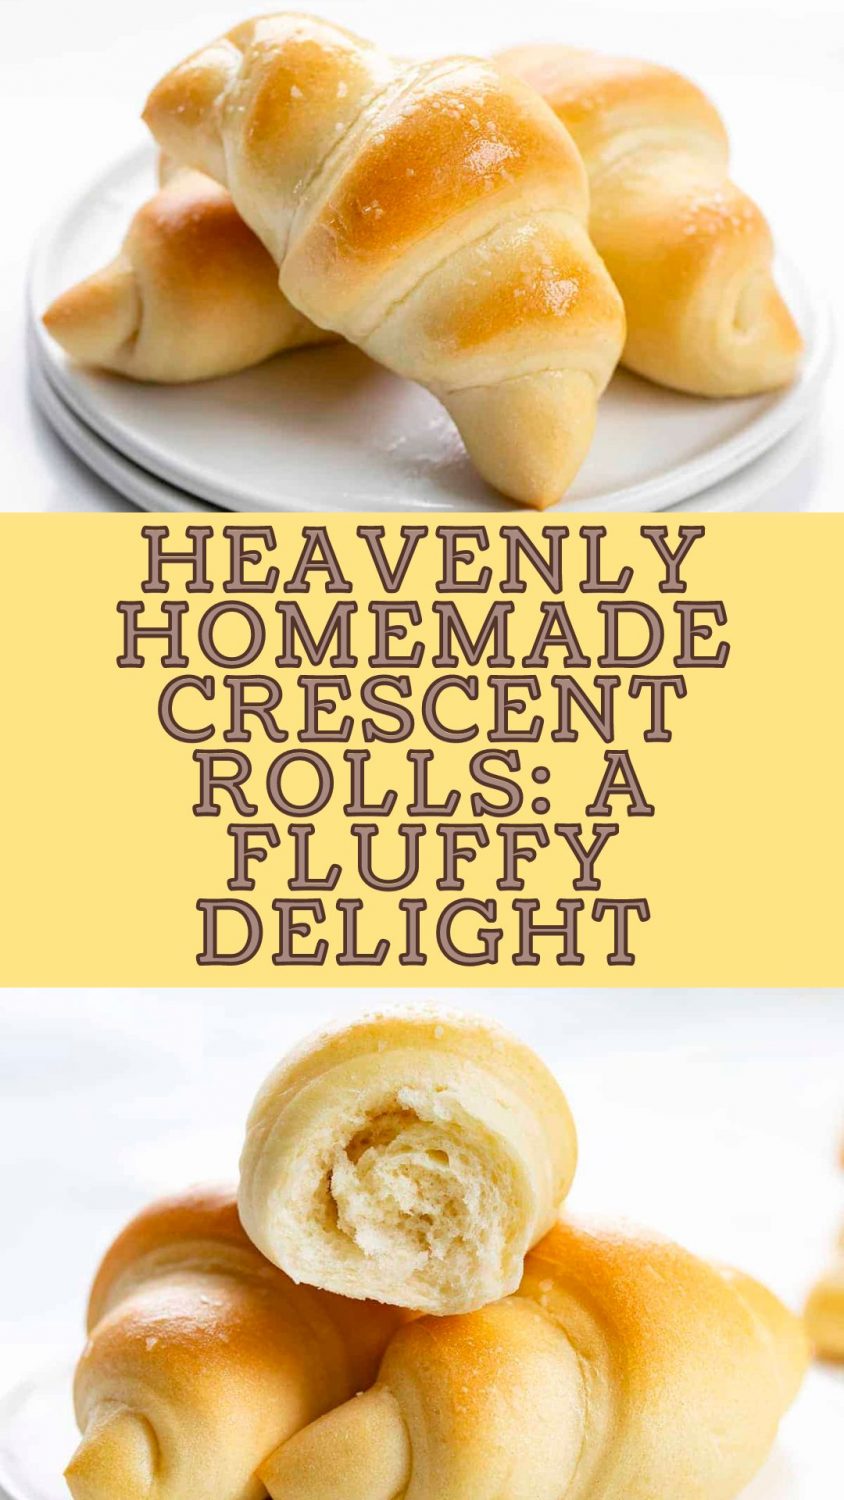 Heavenly Homemade Crescent Rolls: A Fluffy Delight